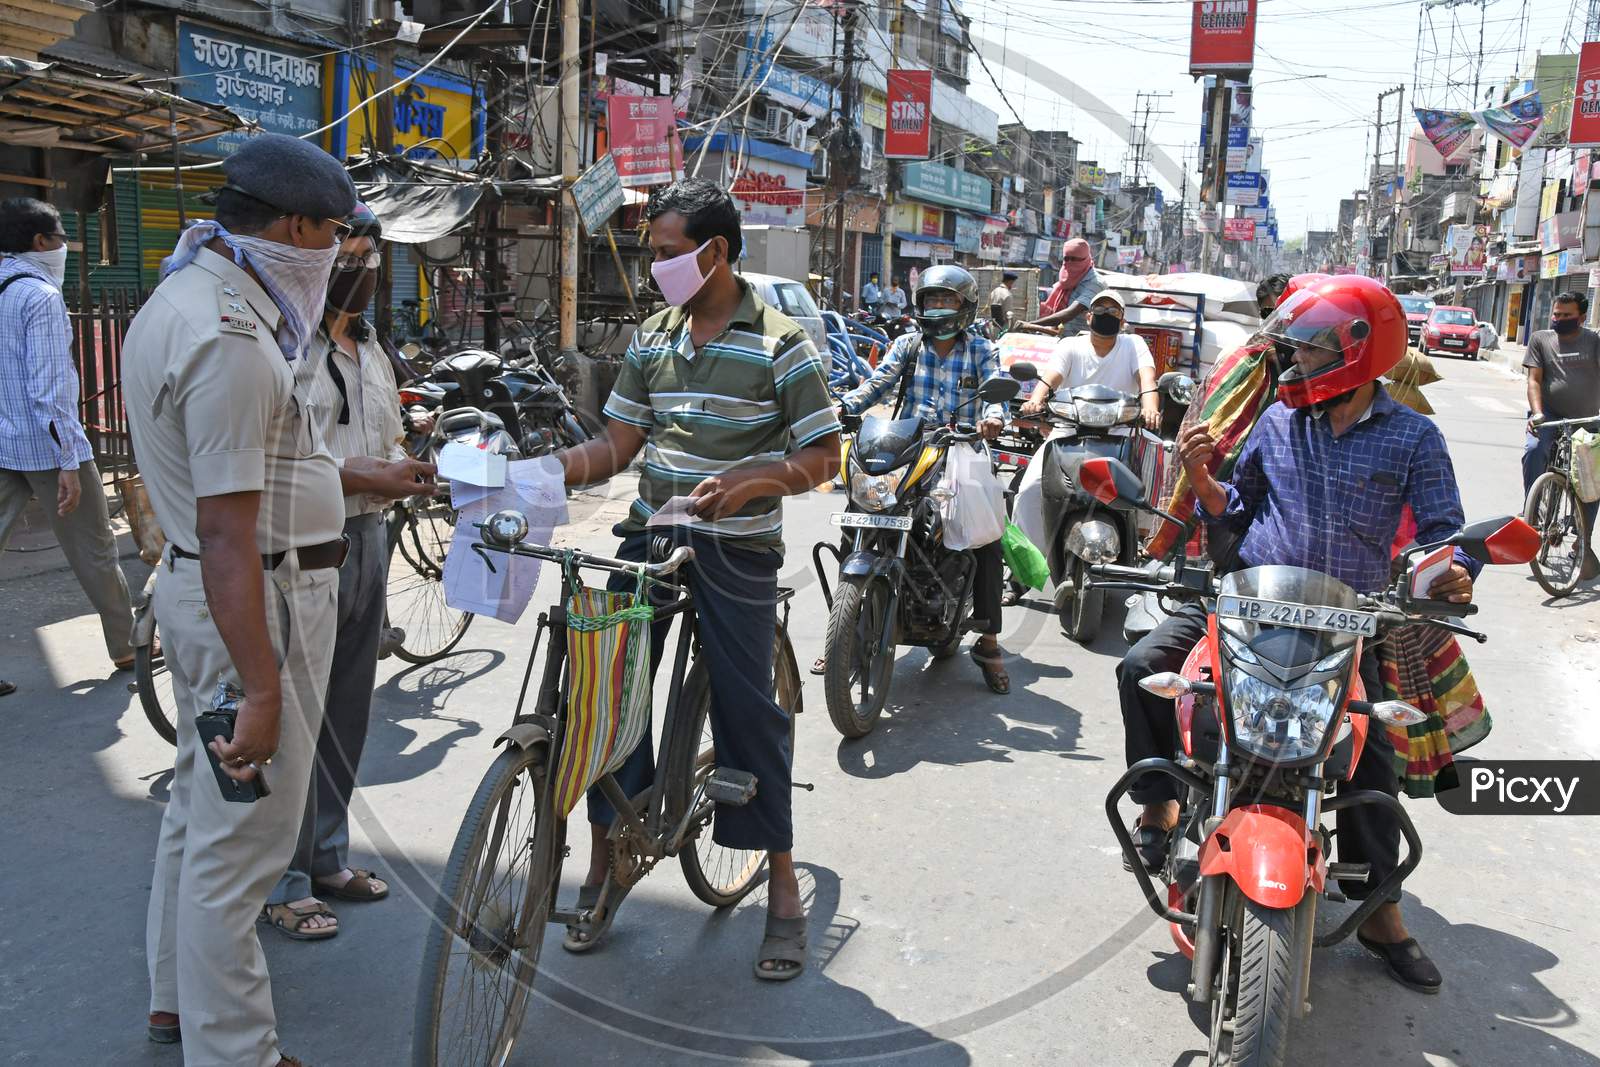 Police operation against lockdown rule breakers. Complete Safety Restrictions - Lockdown to prevent Coronavirus COVID-19 At Burdwan Town, Purba Bardhaman, West Bengal, India.